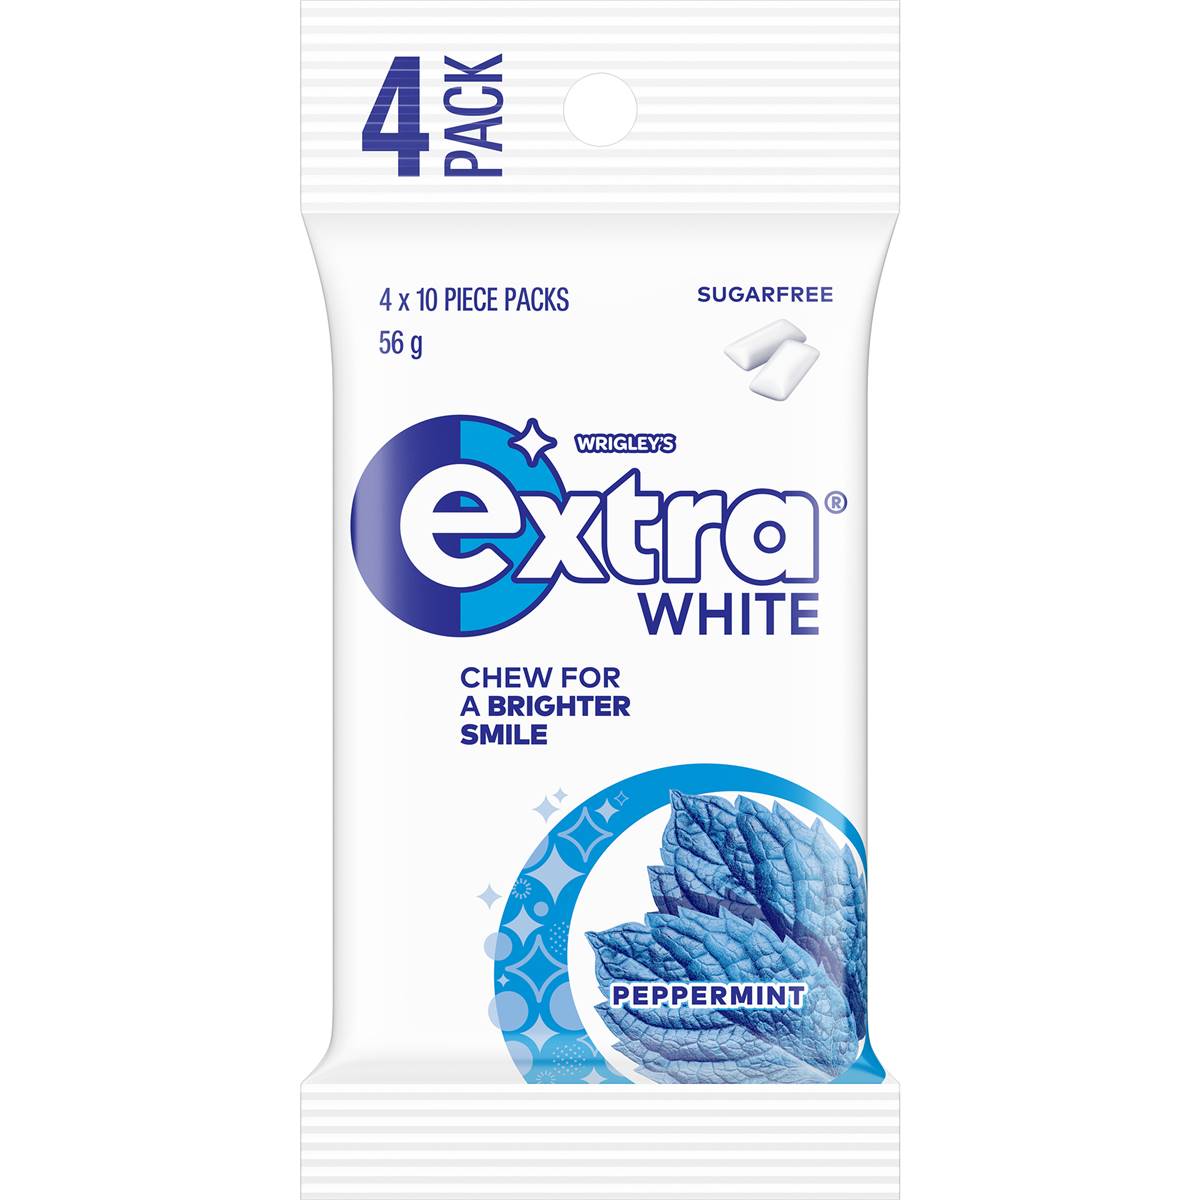 Calories in Wrigley's Extra White Peppermint Chewing Gum Sugar Free 4x10 Piece